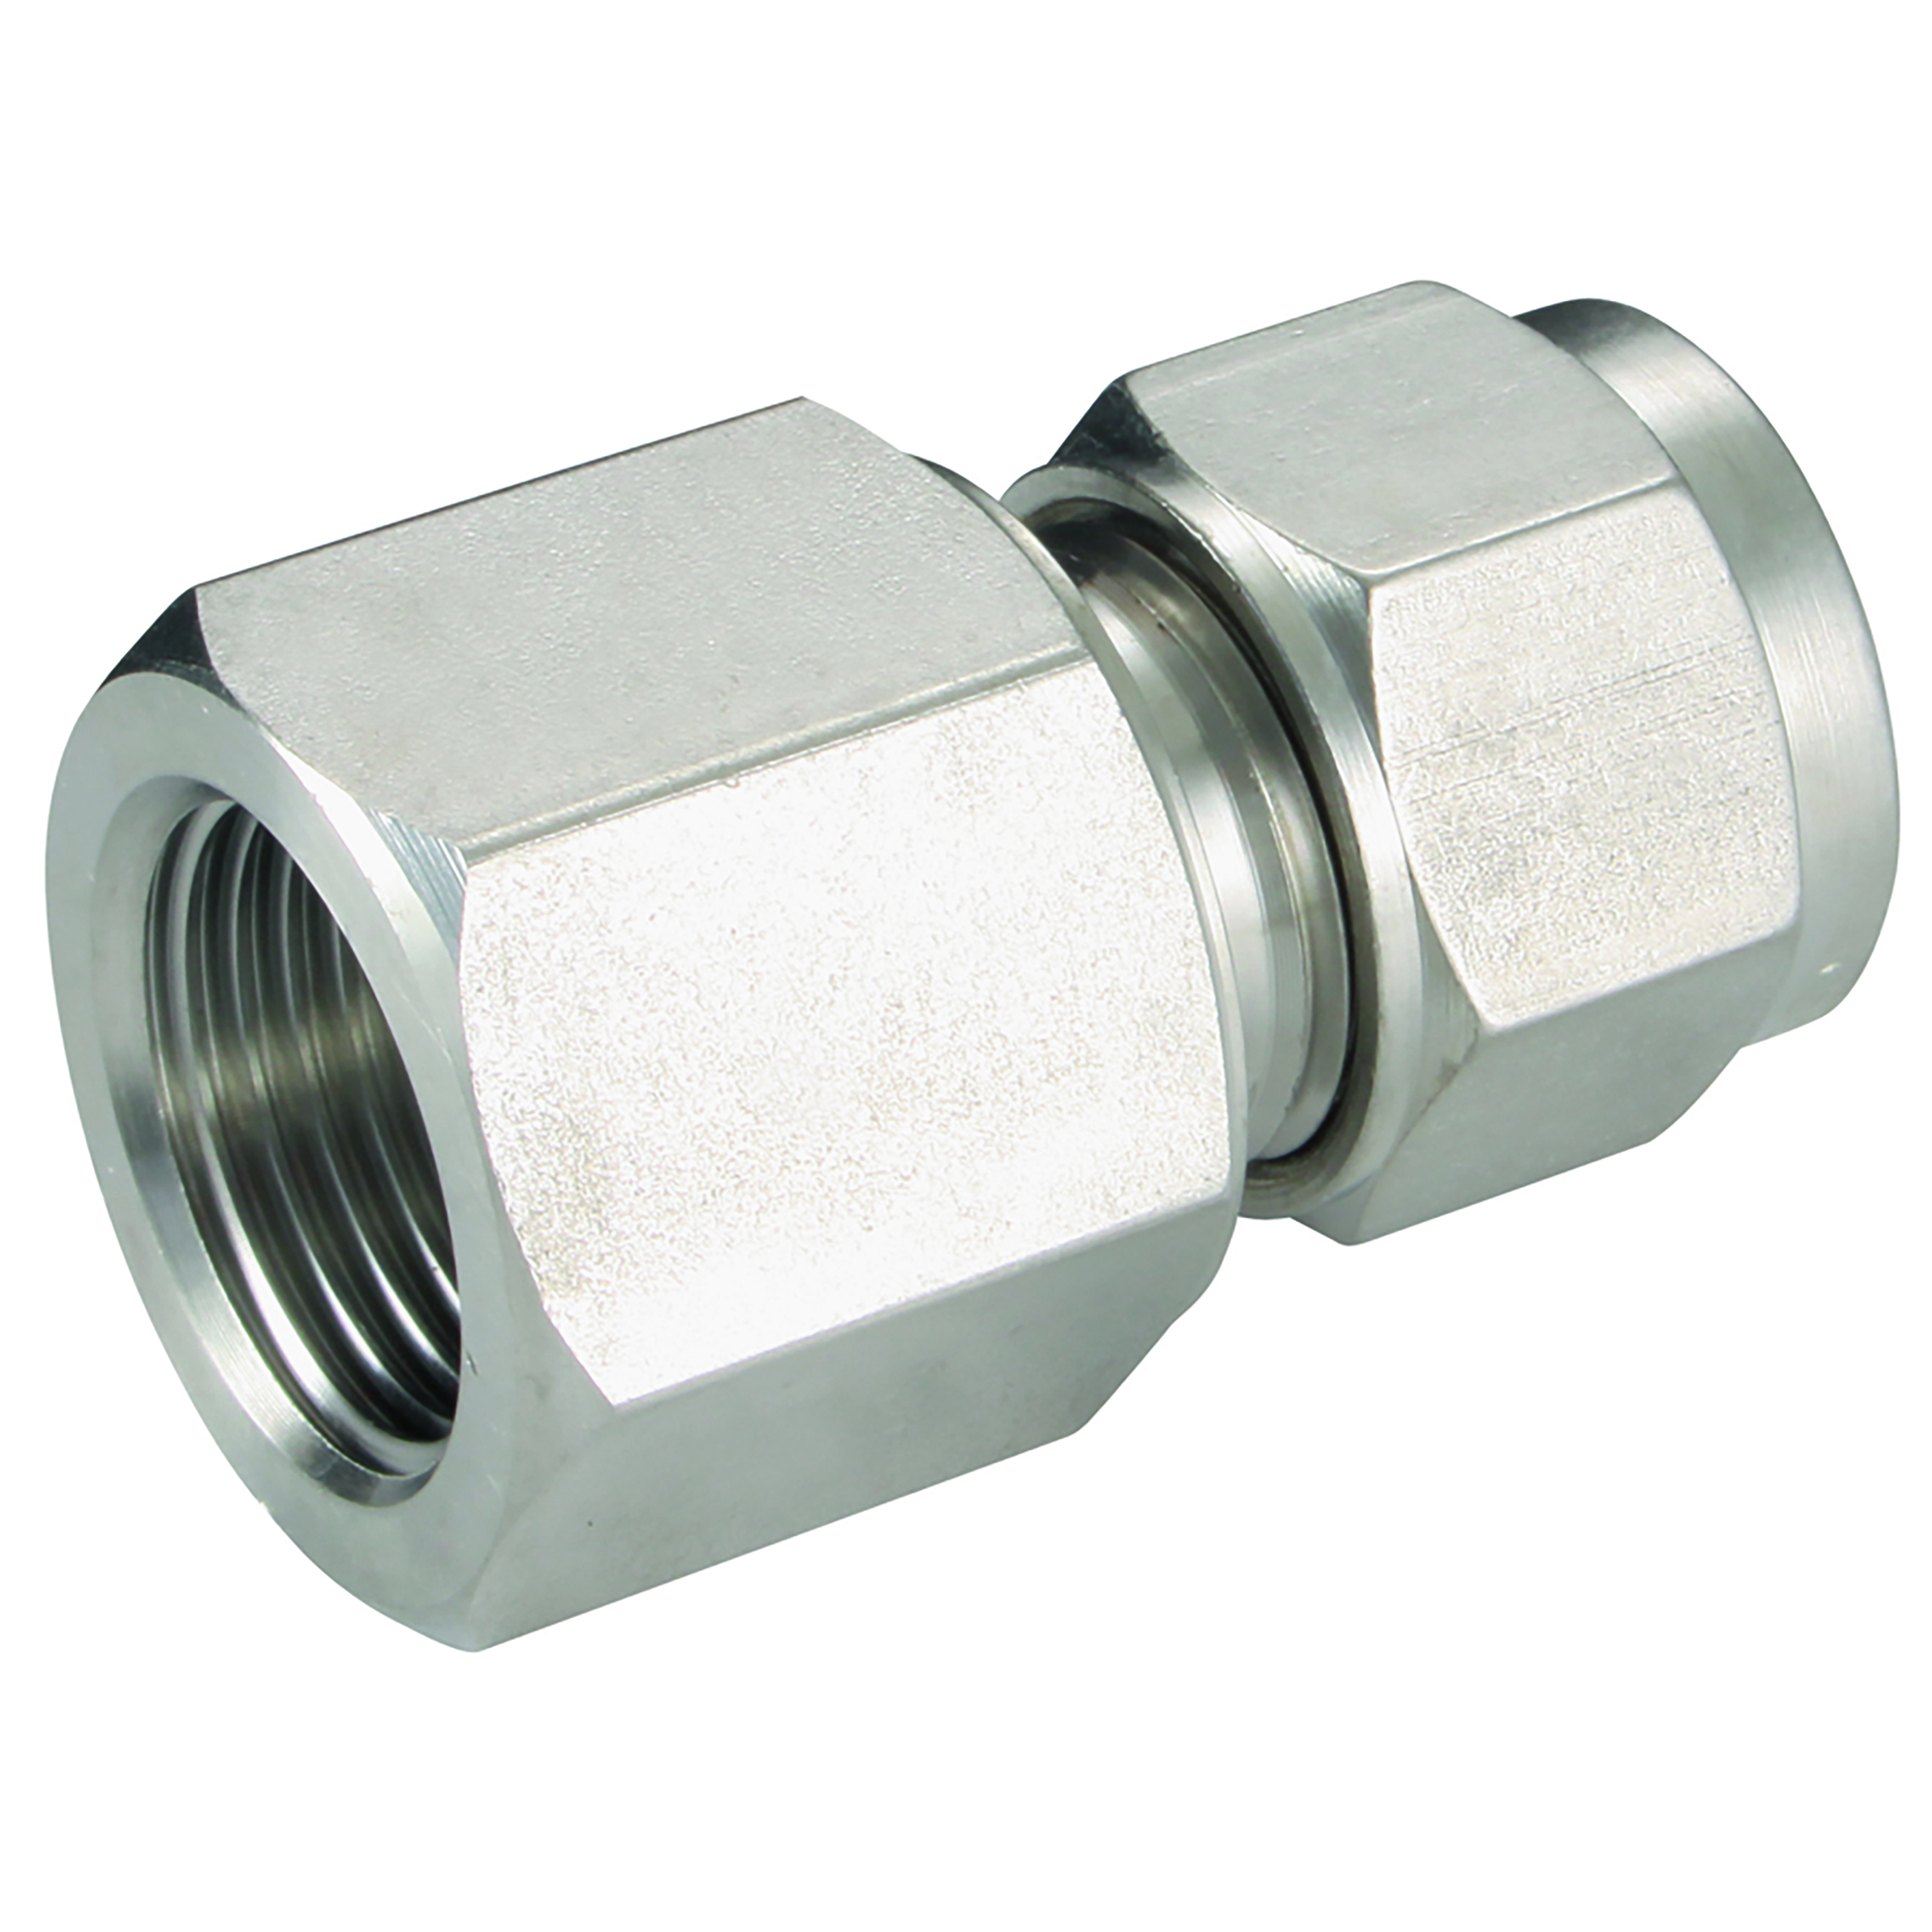 FEMALE CONNECTOR 10 OD 1/4 BSPP